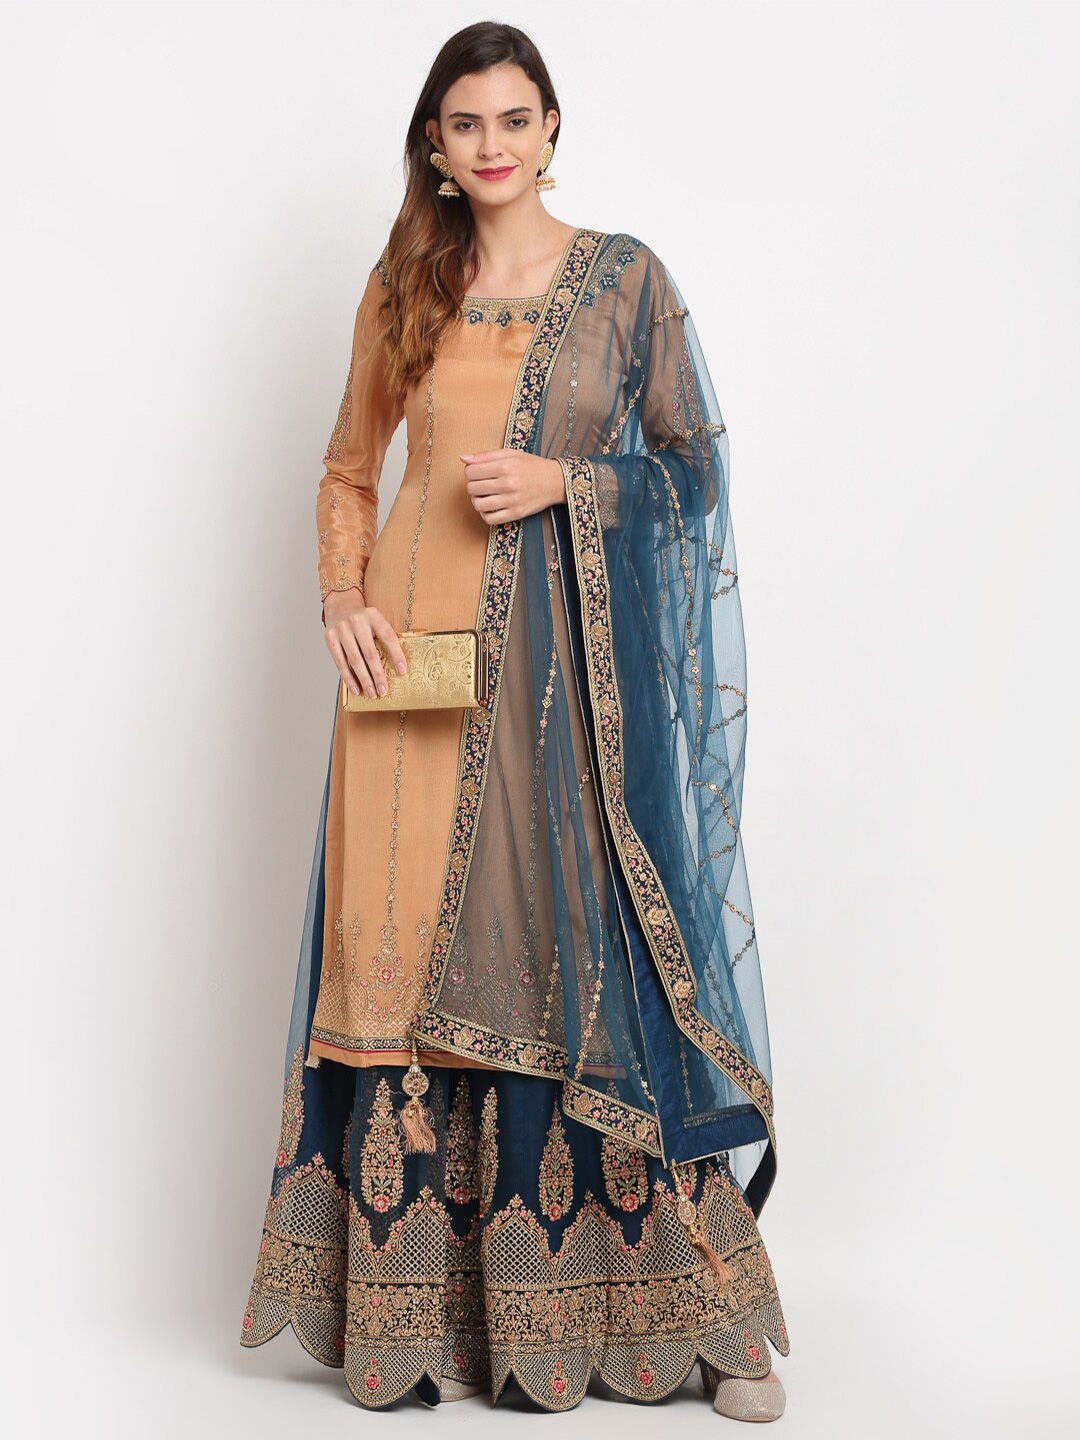 Stylee LIFESTYLE Beige & Teal Embroidered Semi-Stitched Dress Material Price in India